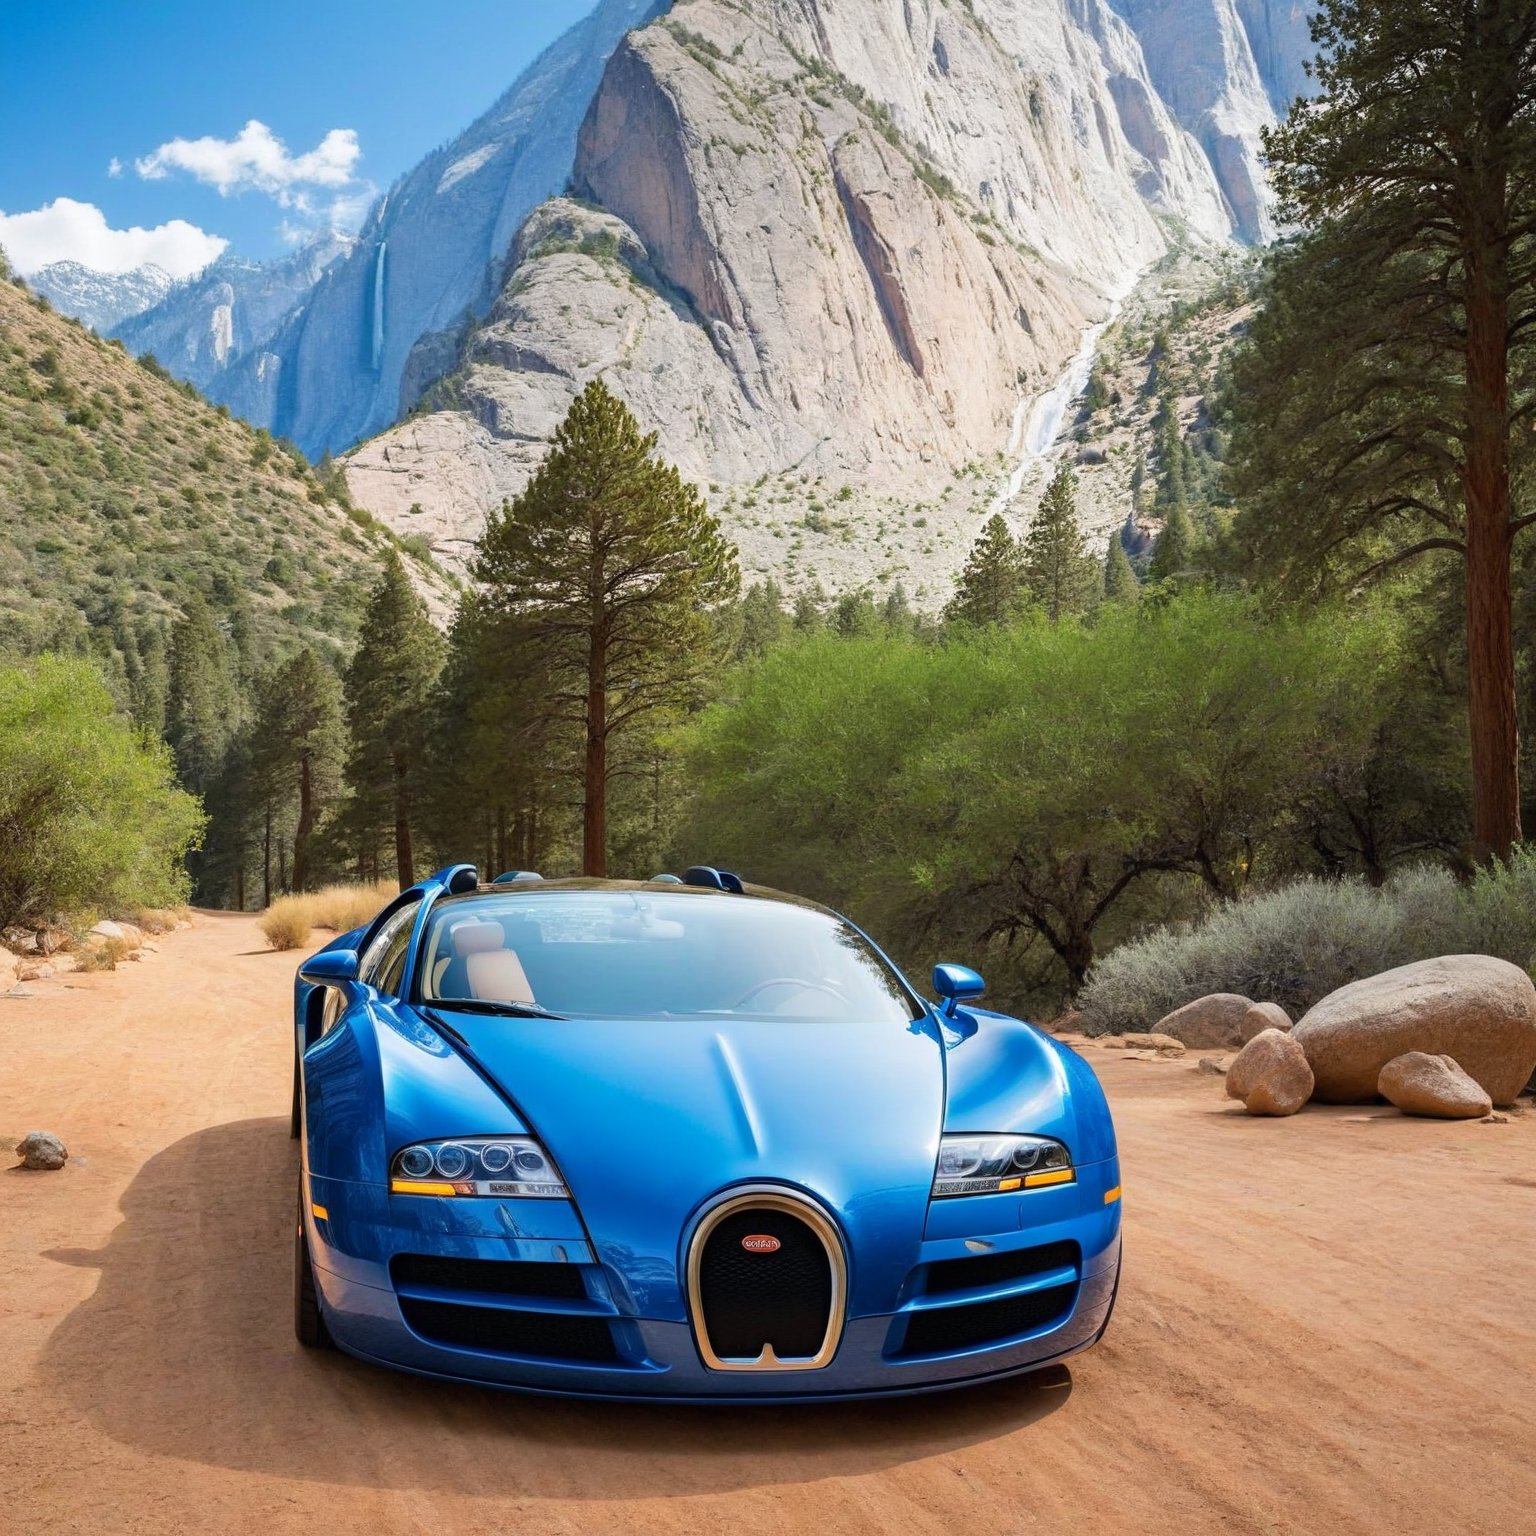 ((Hyper-Realistic)) photo of 1 car \(1999 Bugatti Veyron EB 16.4 designed by Walter de Silva\) parked,(backdrop: national park with mountain,(rock),tree,forest,3boys),Front side view,well-lit
BREAK 
aesthetic,rule of thirds,depth of perspective,perfect composition,studio photo,trending on artstation,cinematic lighting,(Hyper-realistic photography,masterpiece, photorealistic,ultra-detailed,intricate details,16K,sharp focus,high contrast,kodachrome 800,HDR:1.3), real_booster,art_booster,ani_booster,H effect,y0sem1te, ygalc1er